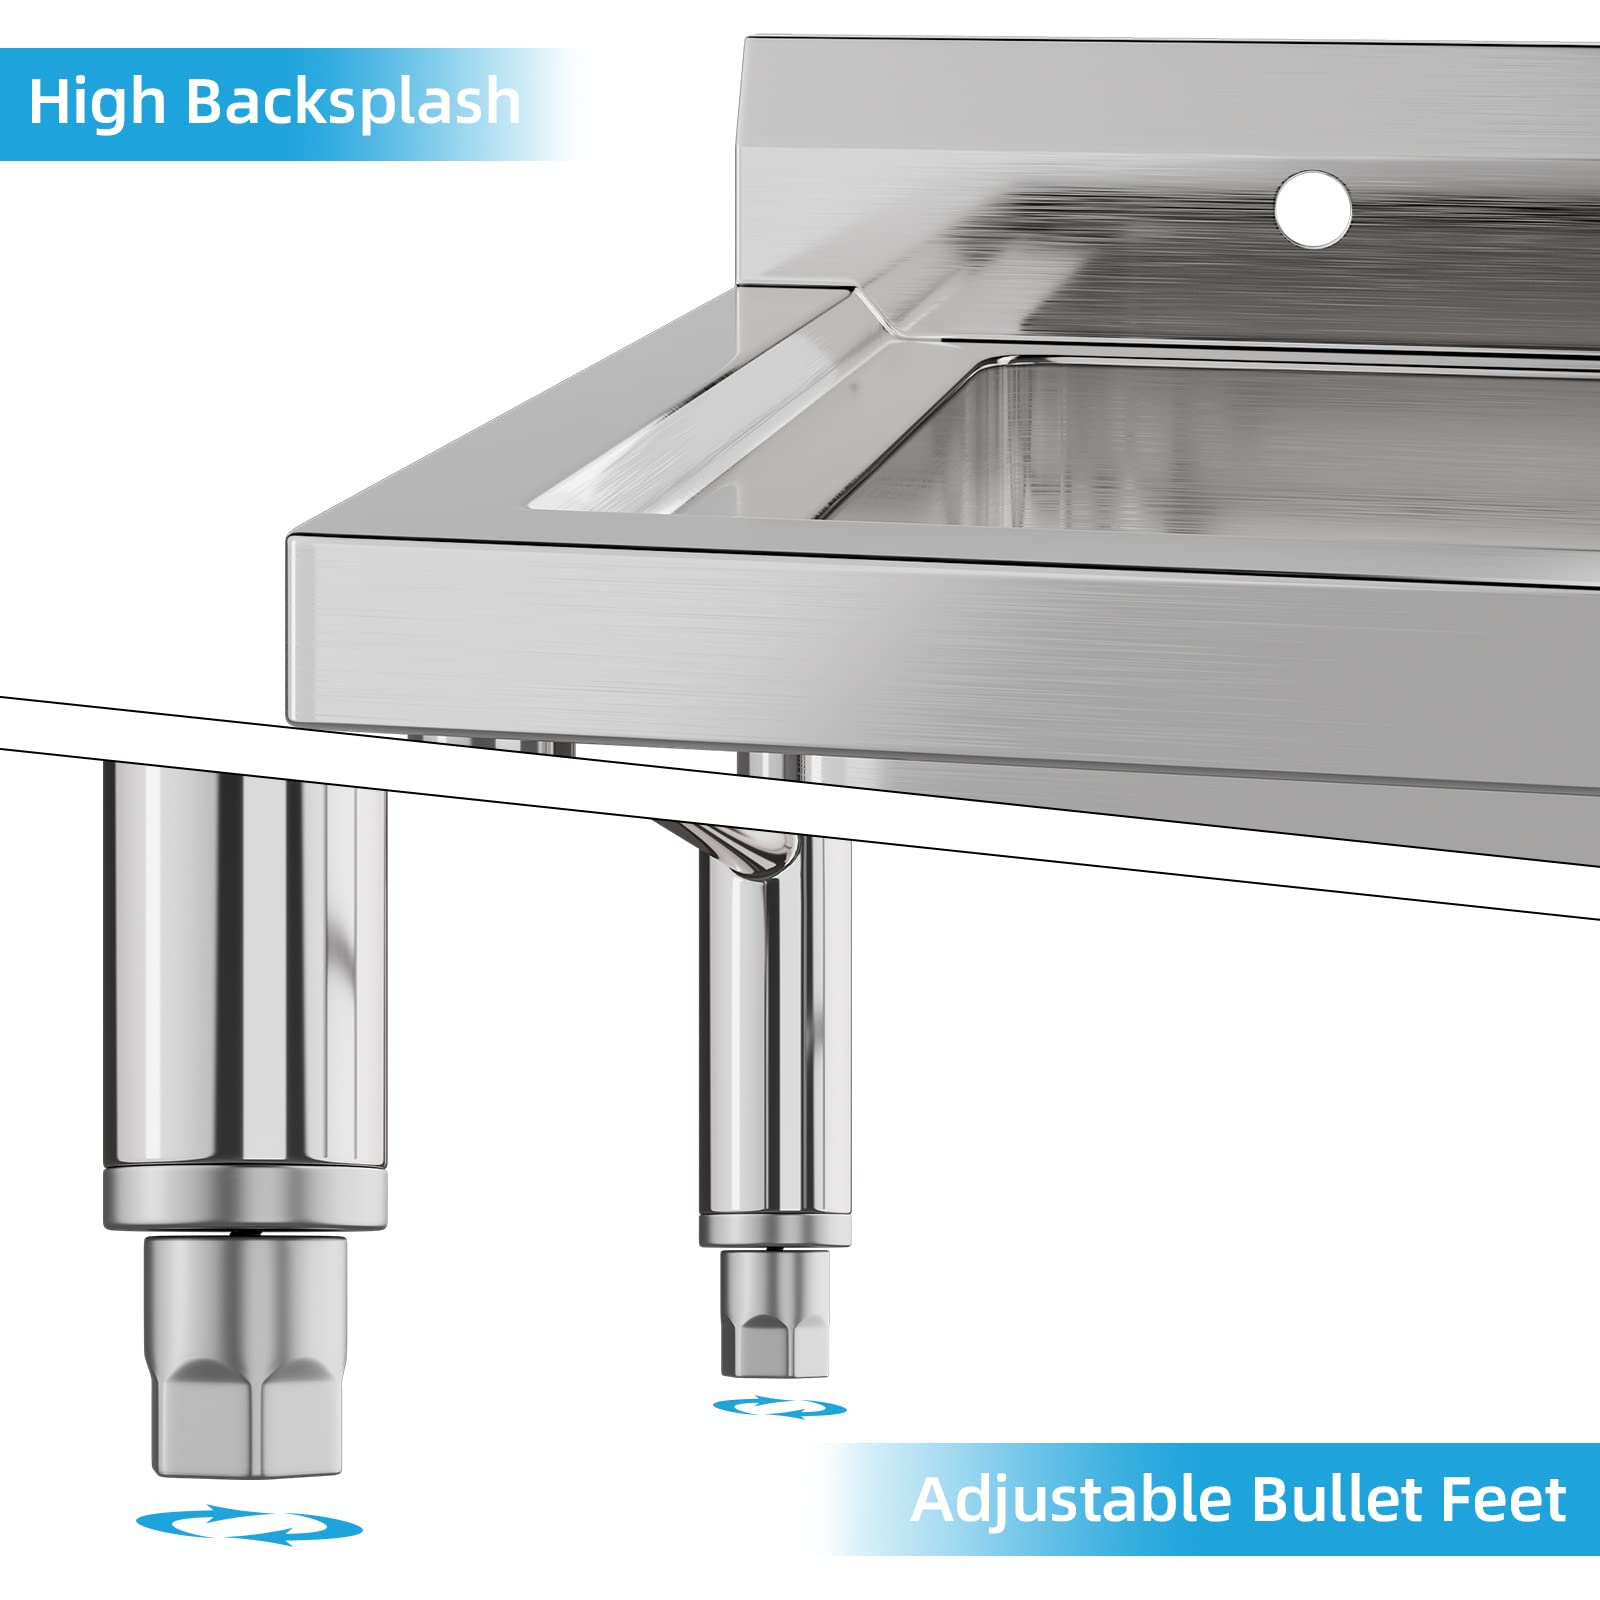 1-Compartment Stainless Sink, Anti-Leak, for Commercial Kitchens